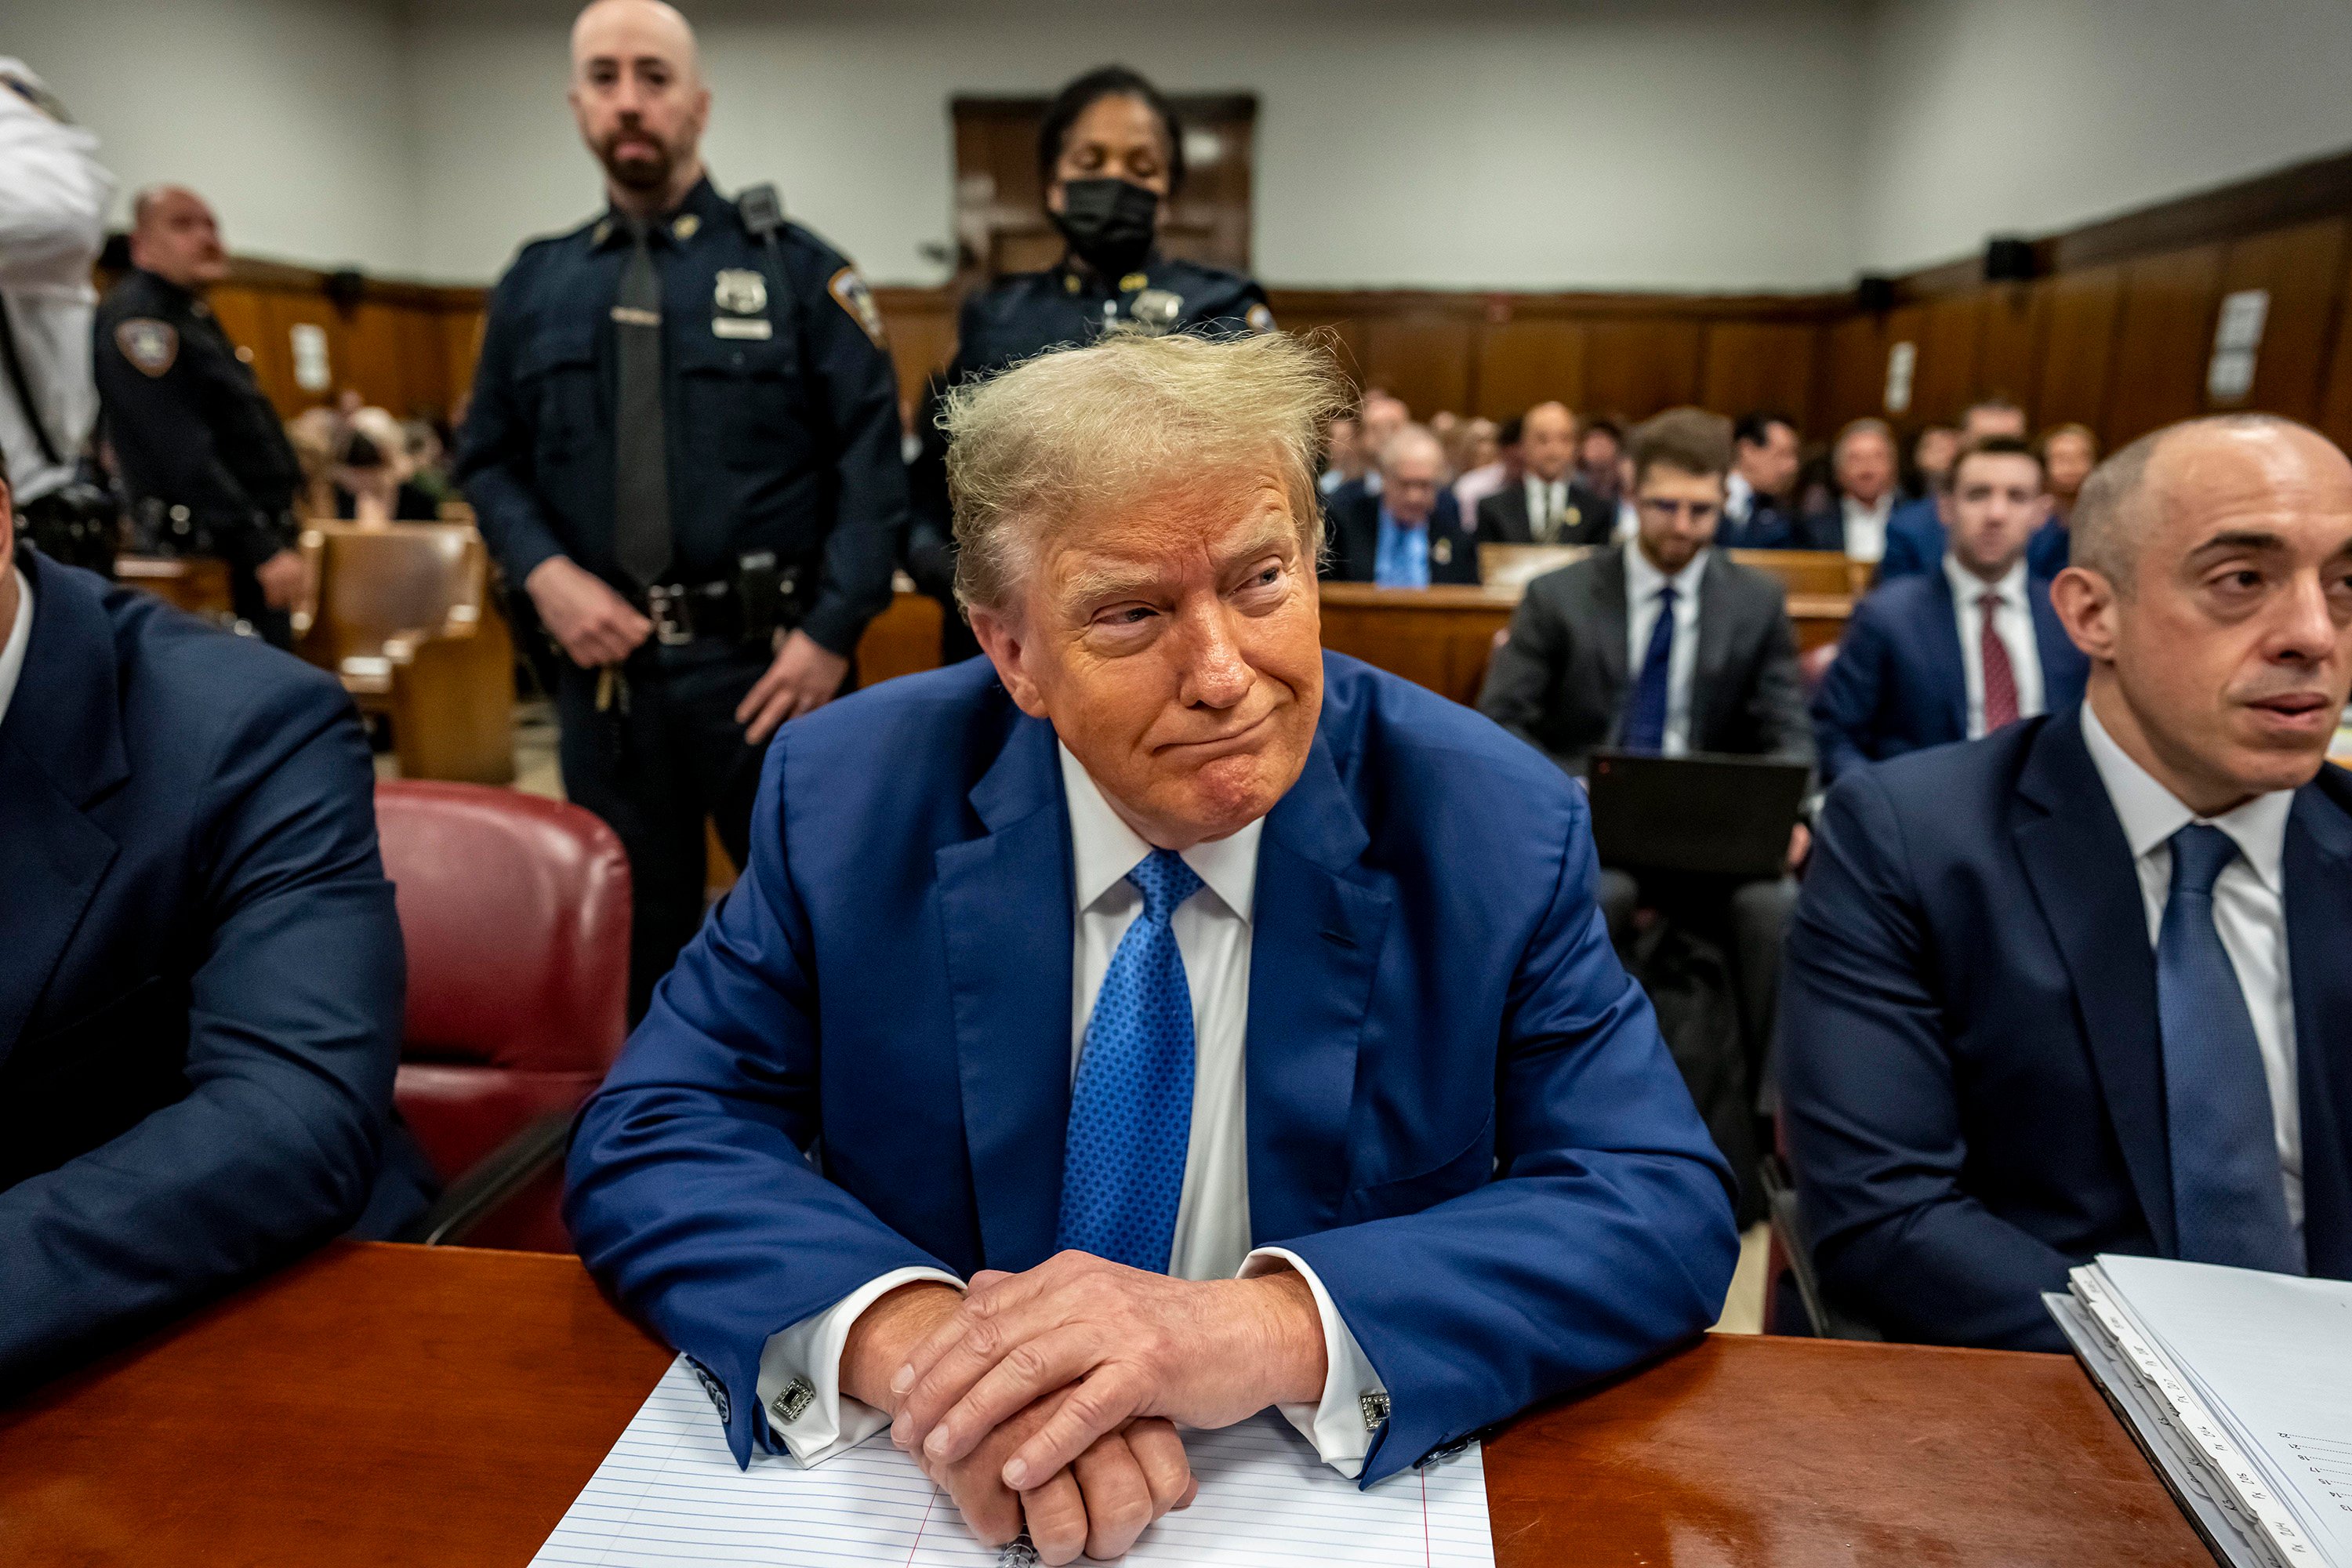 Former US President Donald Trump attends his hush money trial at Manhattan Criminal Court in New York City on May 20. Photo: Getty Images/TNS